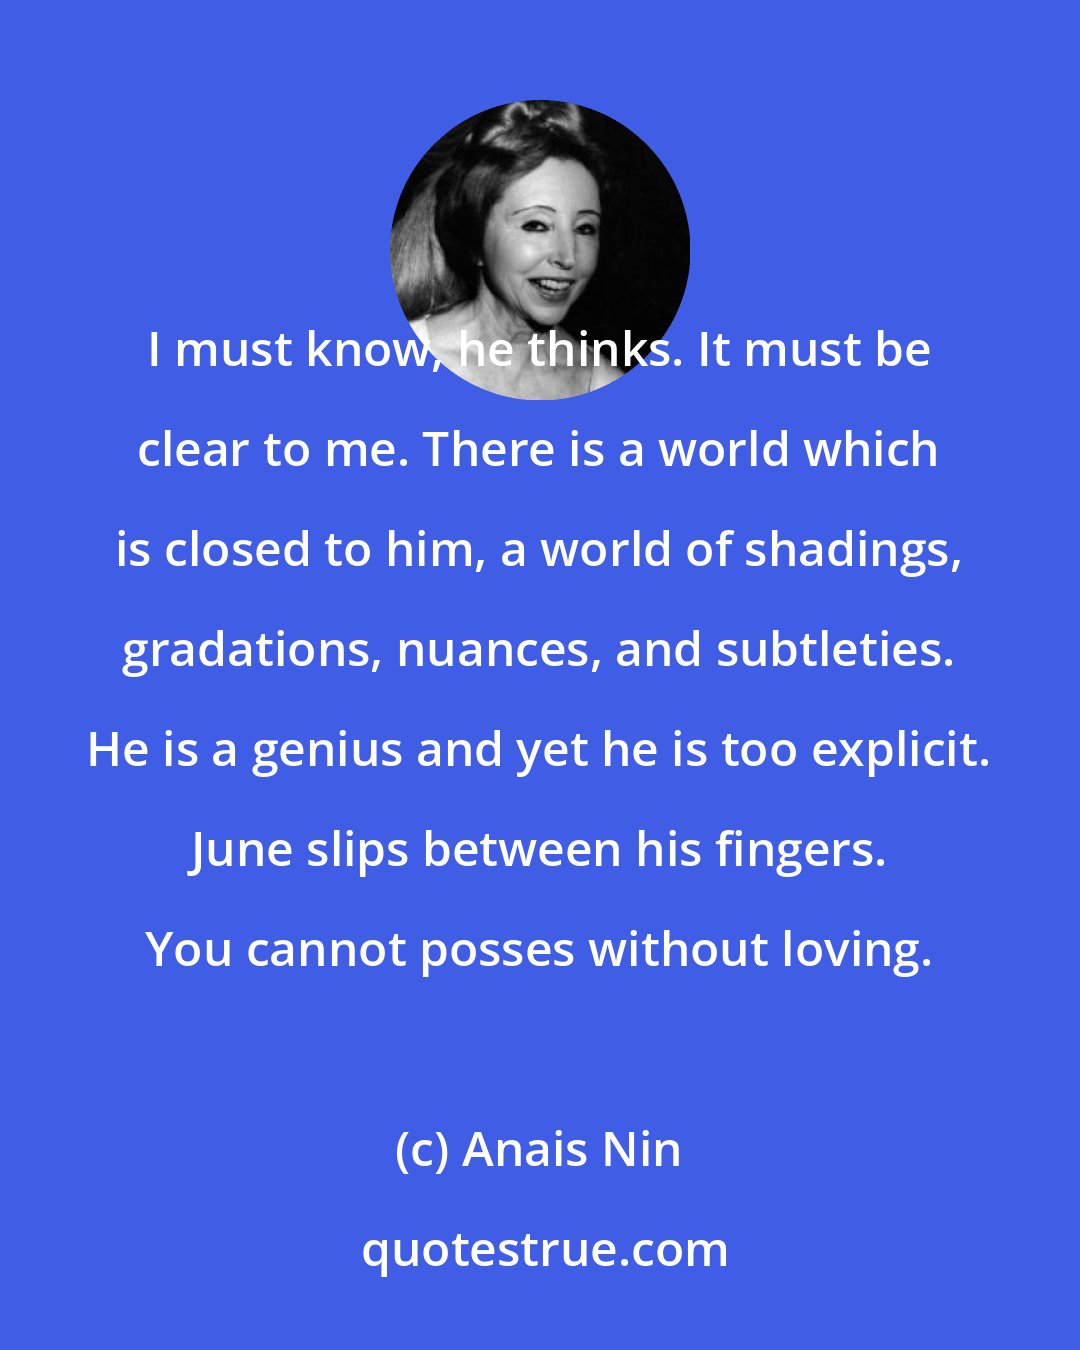 Anais Nin: I must know, he thinks. It must be clear to me. There is a world which is closed to him, a world of shadings, gradations, nuances, and subtleties. He is a genius and yet he is too explicit. June slips between his fingers. You cannot posses without loving.